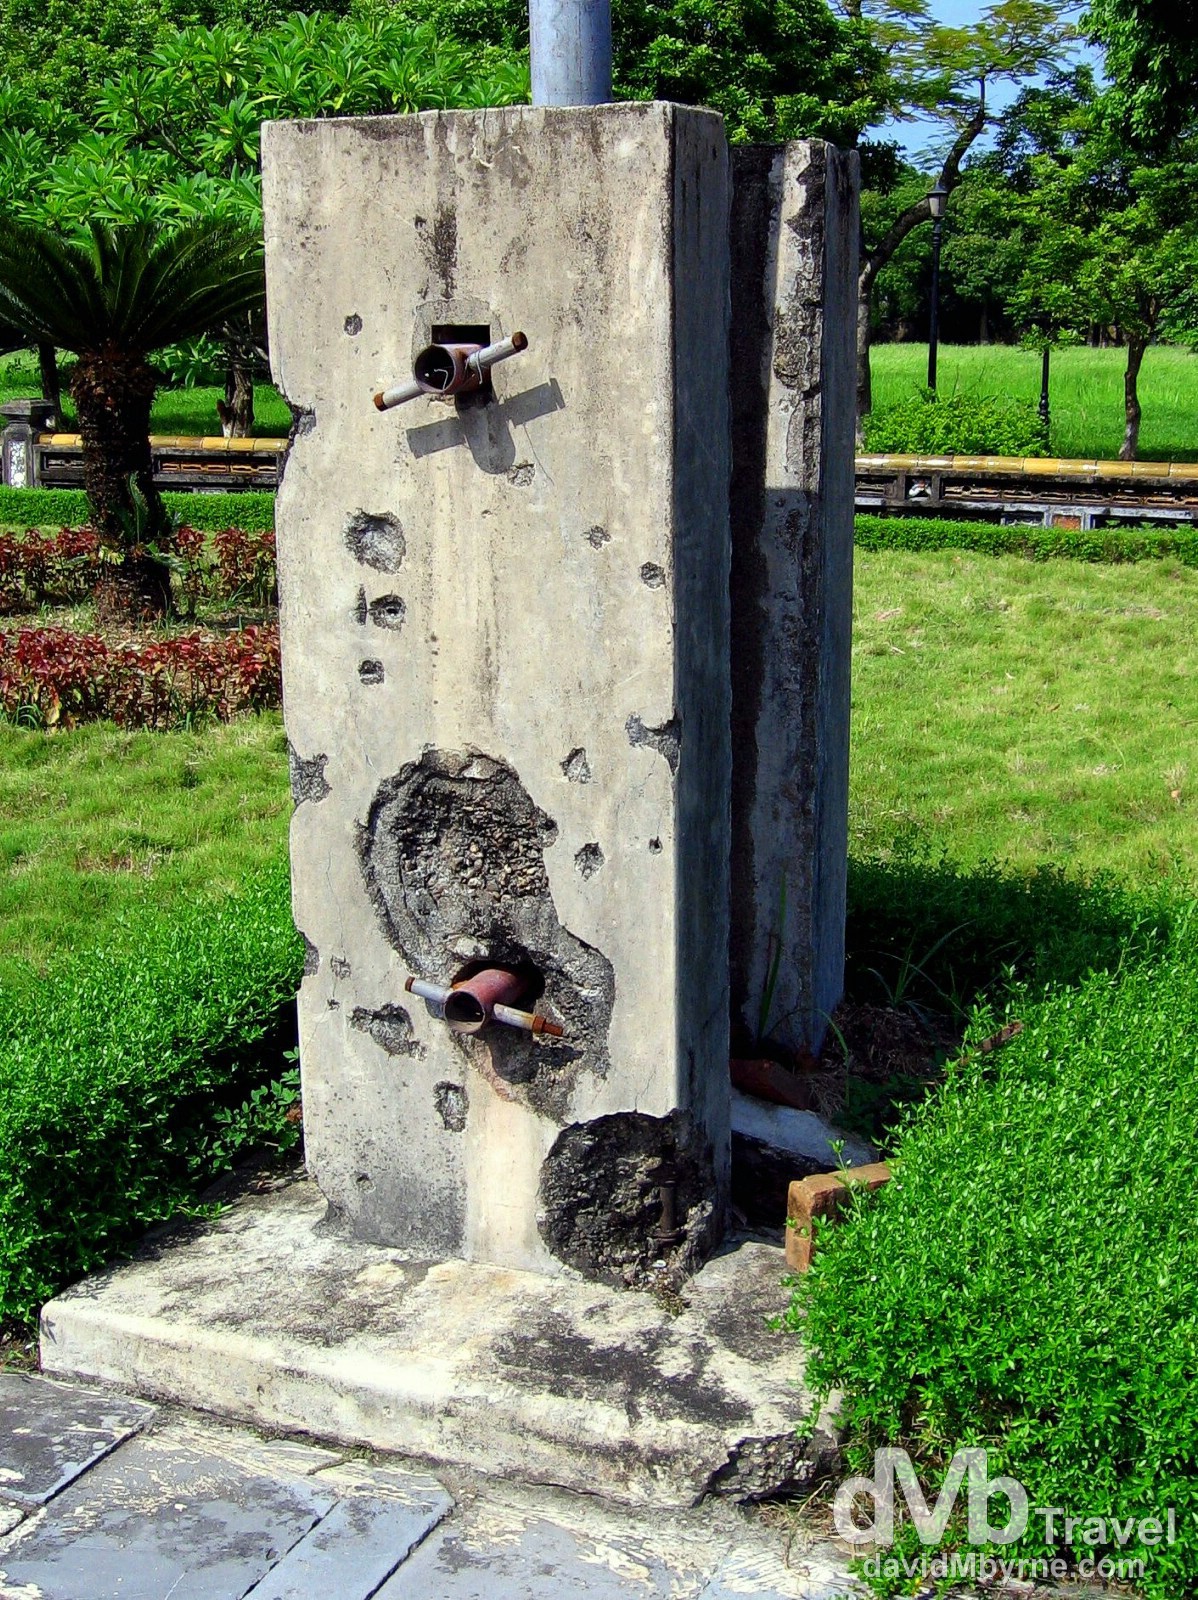 Damage from the warring past visible in the grounds of the UNESCO-listed Citadel in Hue, Central Vietnam. September 7th, 2005.